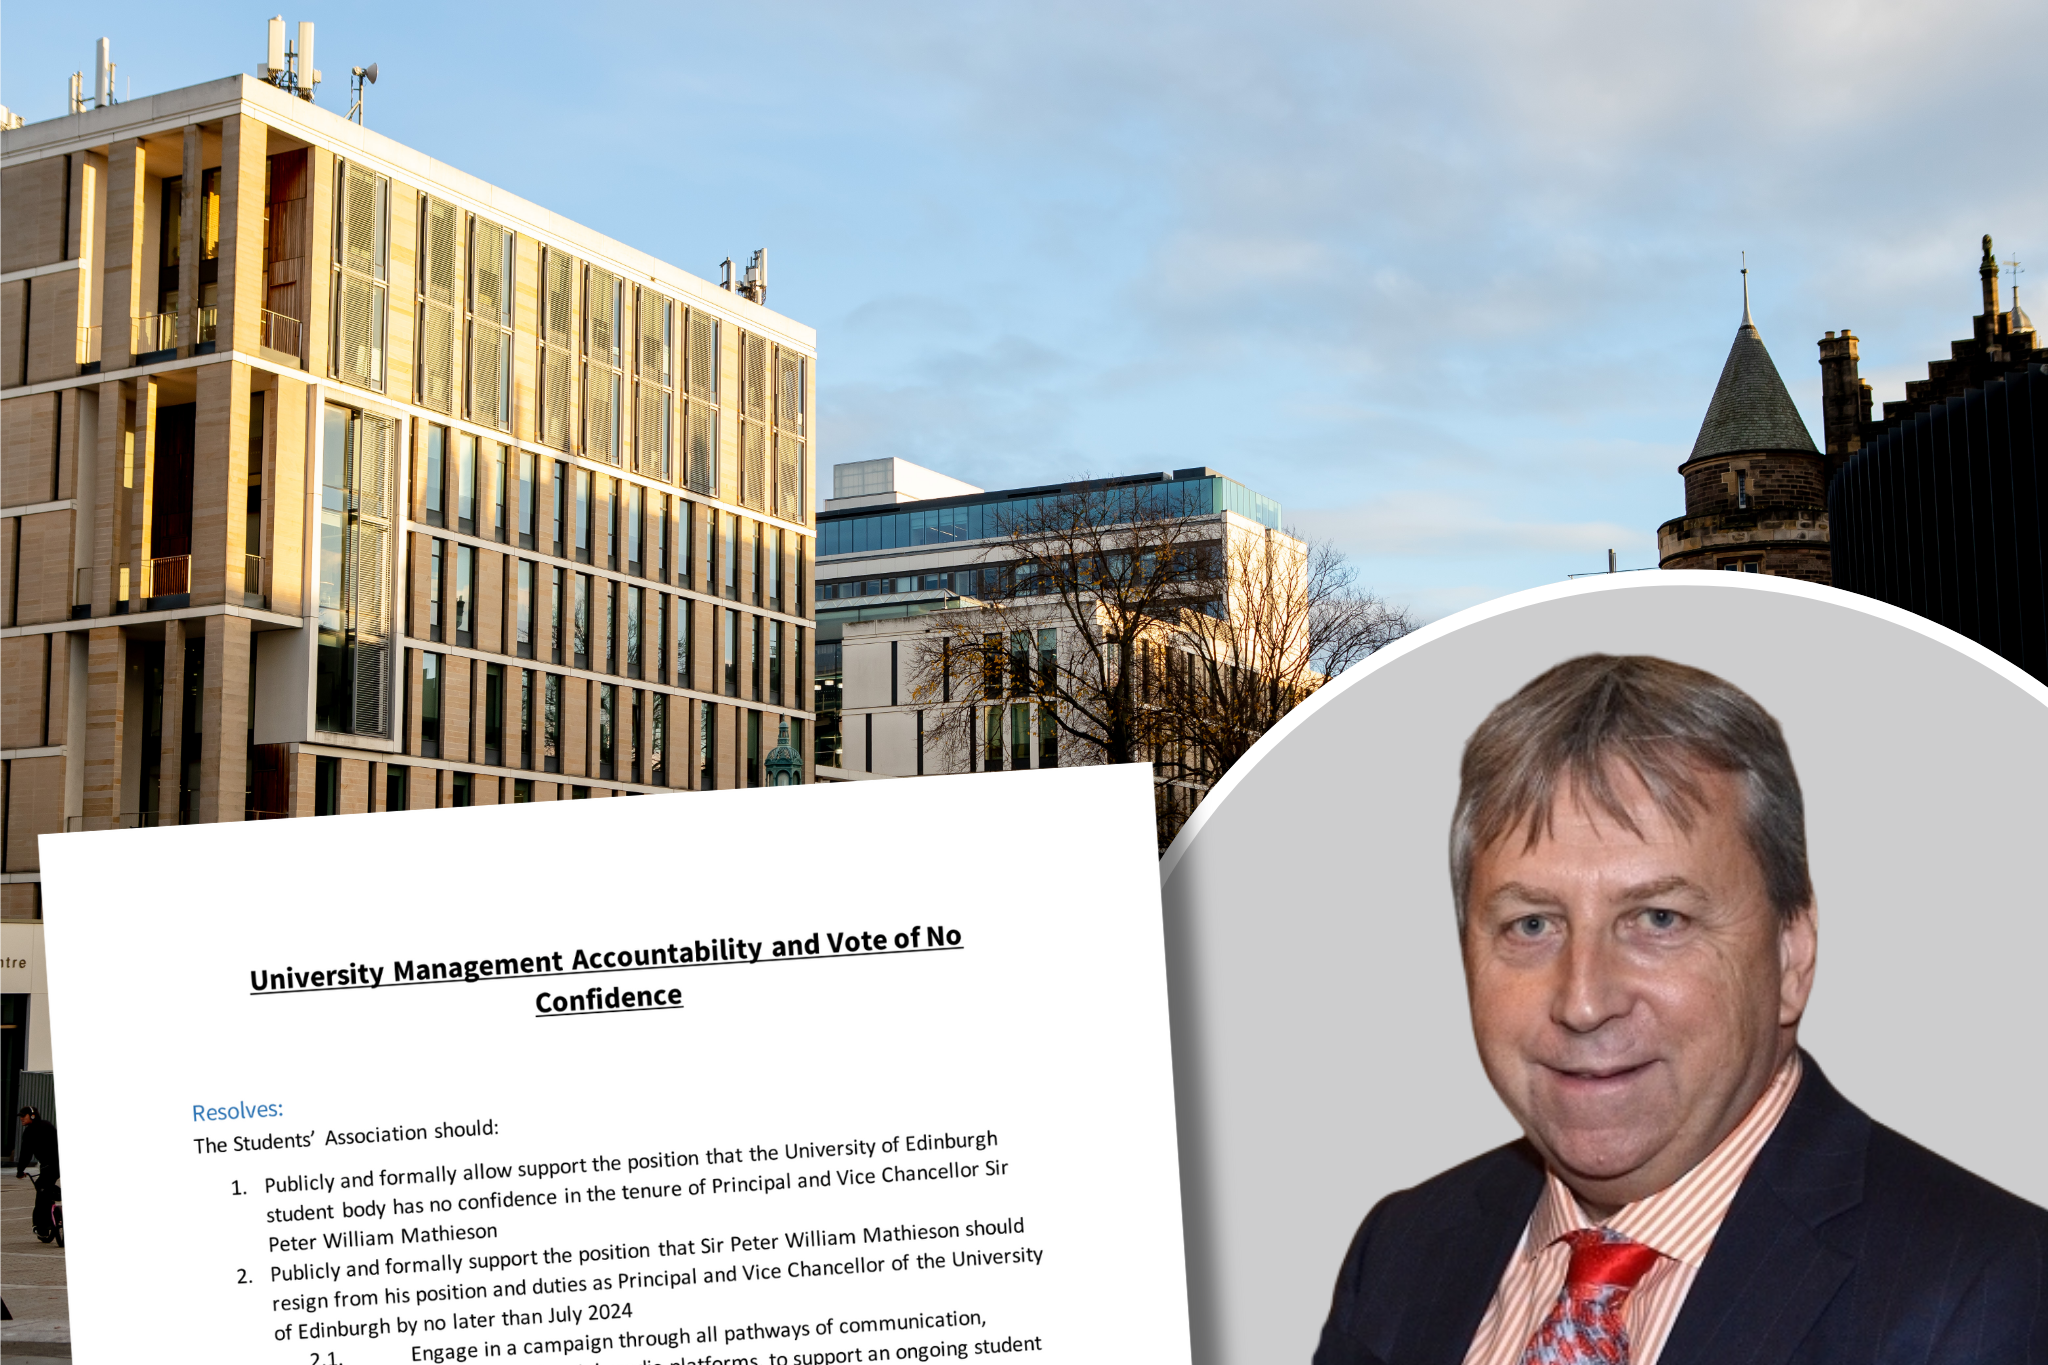 Peter Mathieson smiles slightly against a gray background, which is on top of a picture of Bristo Square. Also on top of the picture of Bristo Square is the draft motion, entitled "University Management Accountability and Vote of No Confidence".